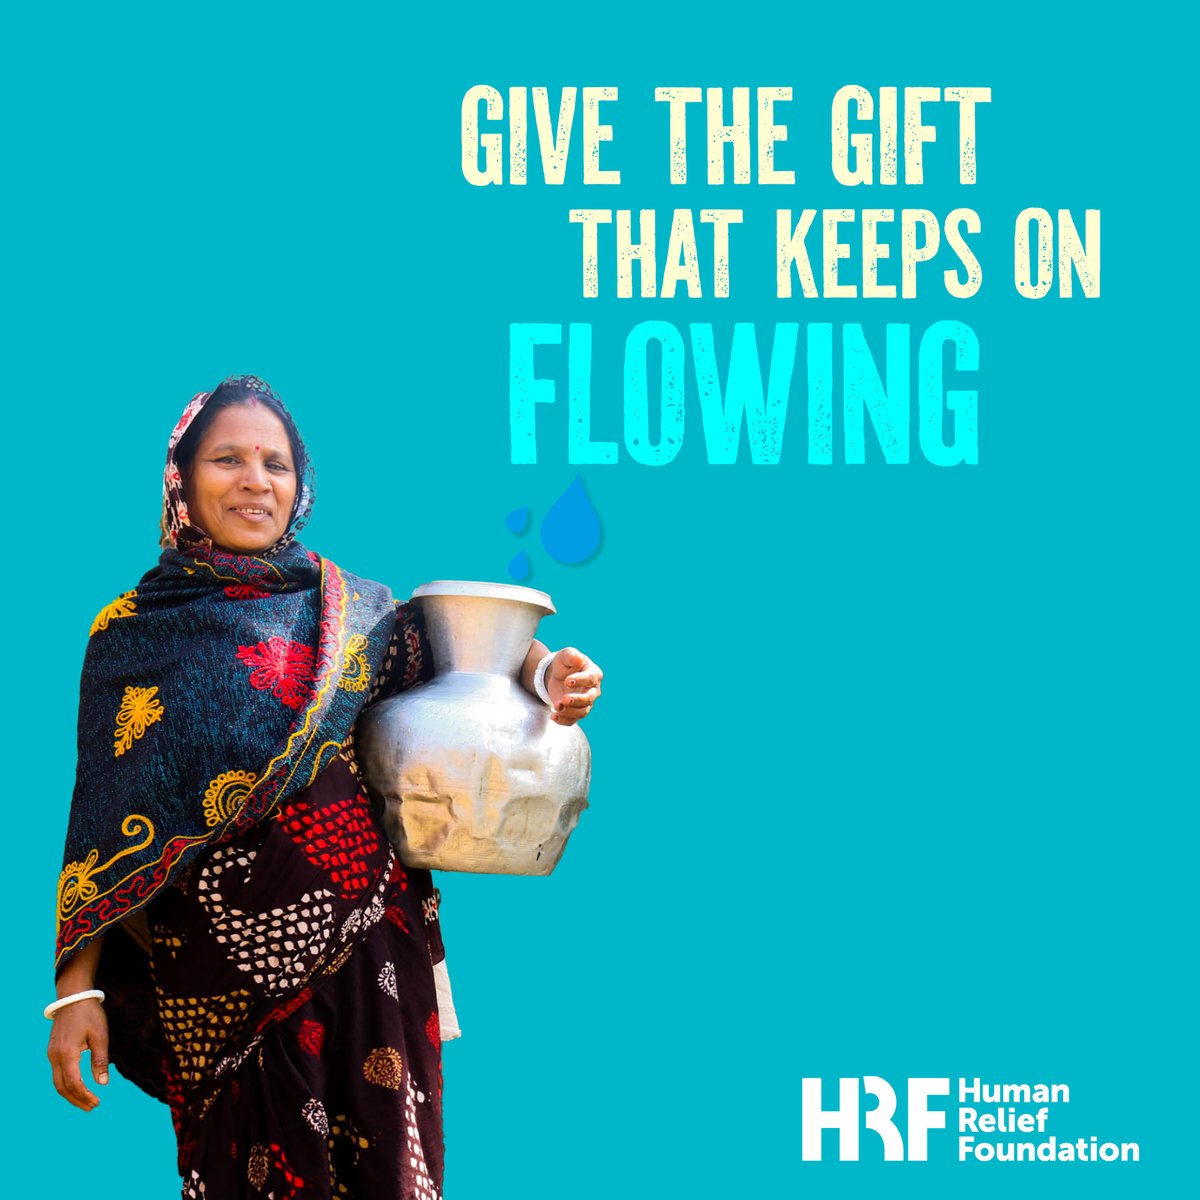 1 in 3 people lack safe water, often forcing women to travel miles. We're building 160+ fresh water sources this year, giving communities safe water and freeing women to return to school. Join our water appeal and support generations! 💧🌎 #WaterForAll hrf.org.uk/our-causes/wat…